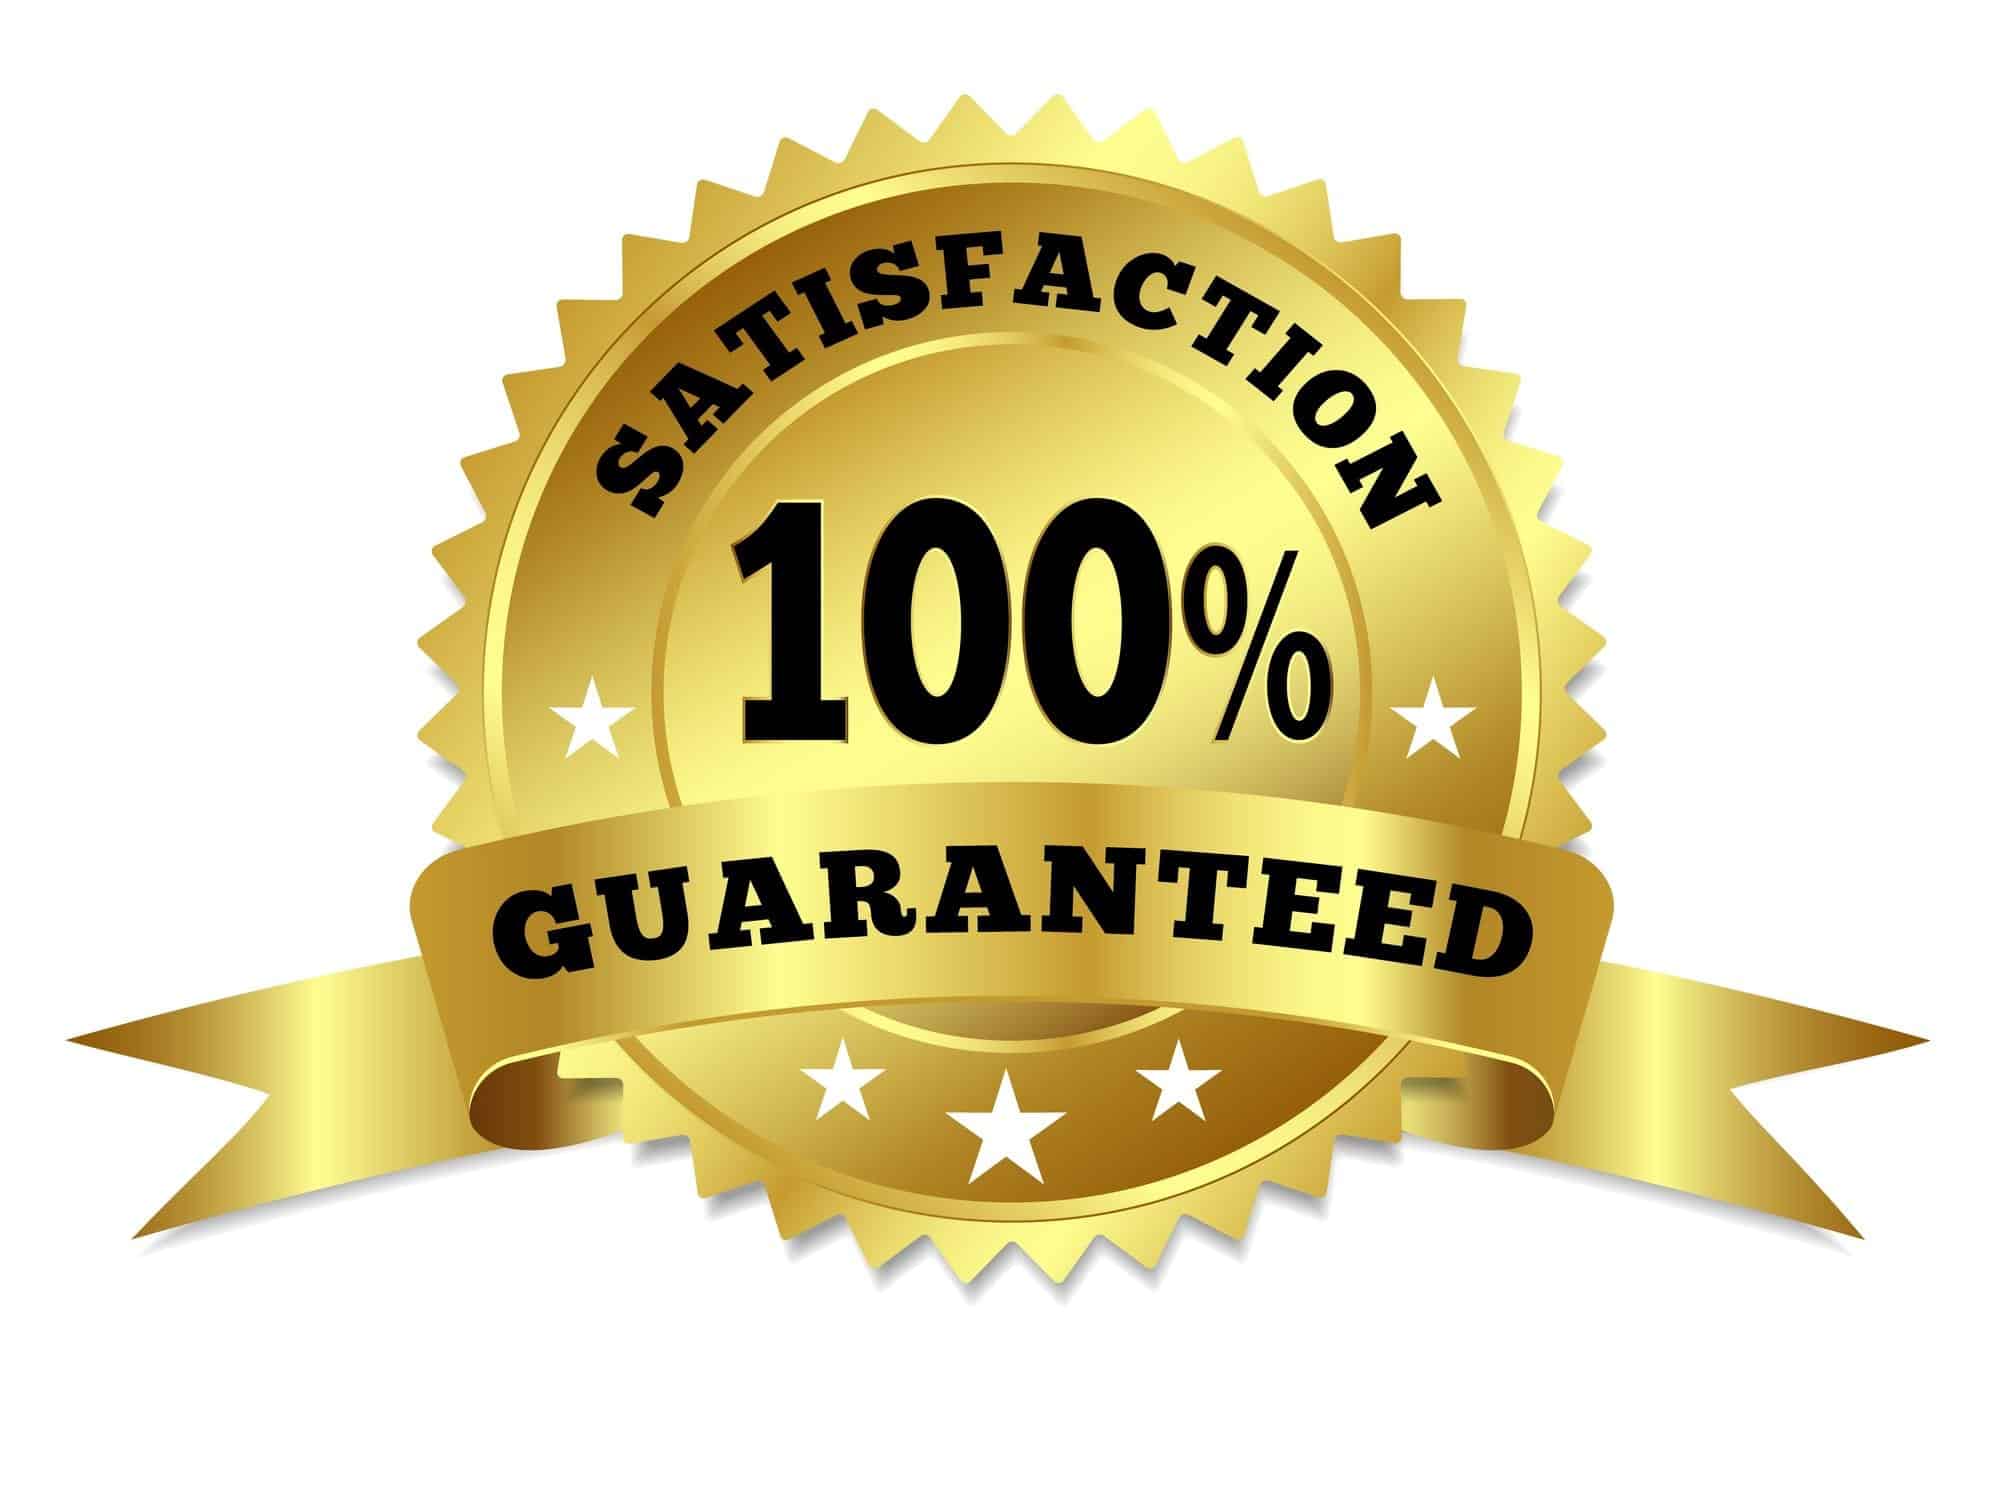 Vector gold circular label badge with text 100 percent satisfaction guaranteed, medal with ribbon and stars on white background.